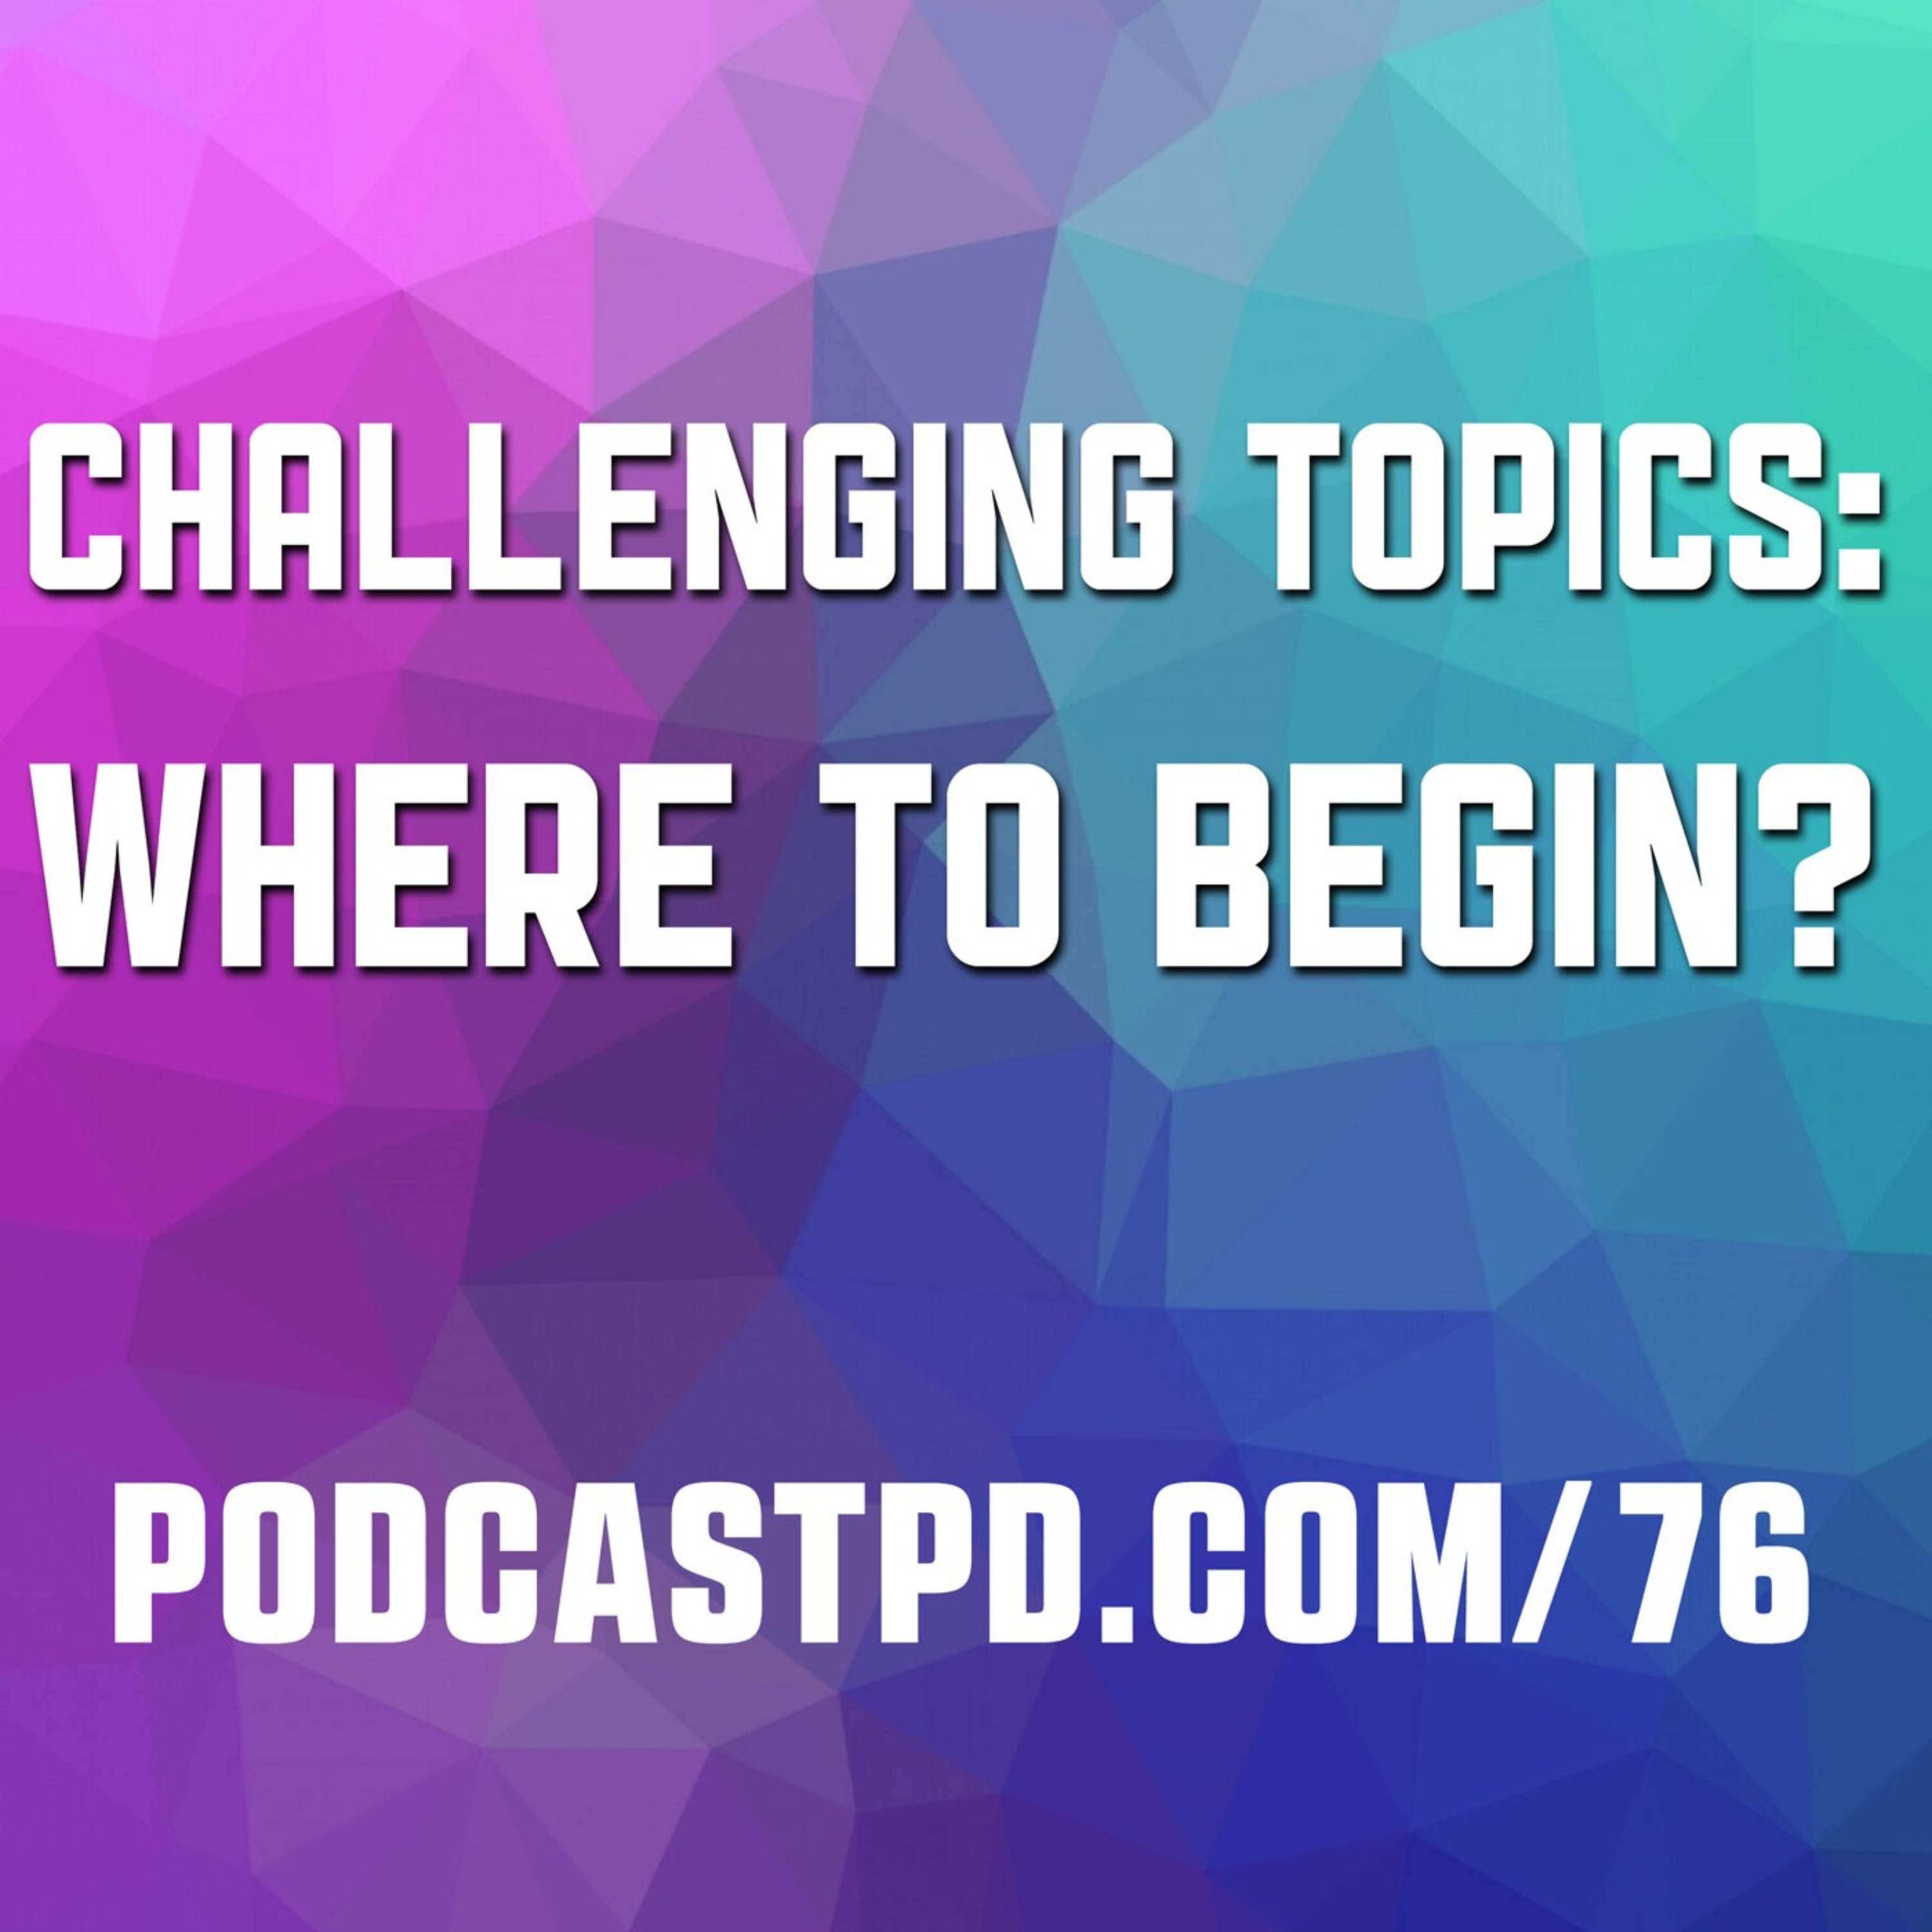 Challenging Topics: Where to Begin? - PPD076 Image